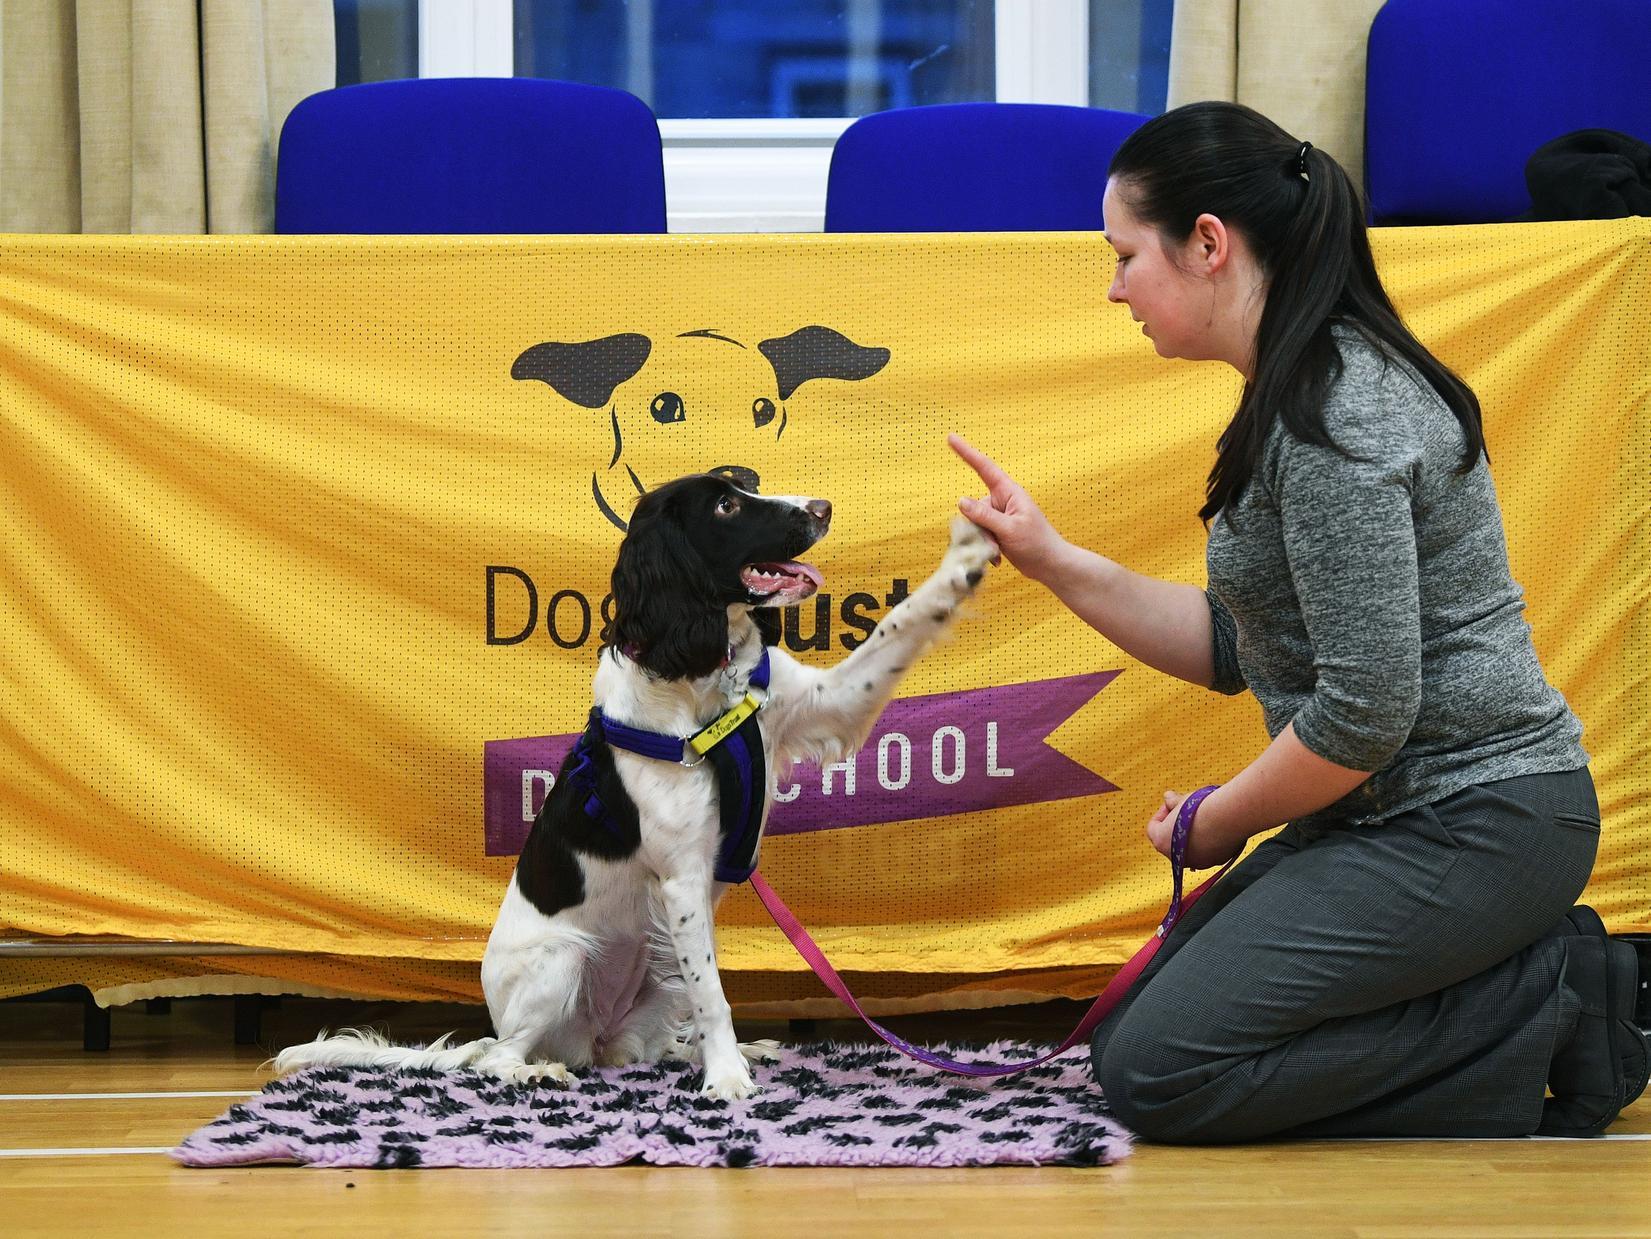 Jade Westgarth and her dog Millie at Leeds Dogs Trust Dog School session.